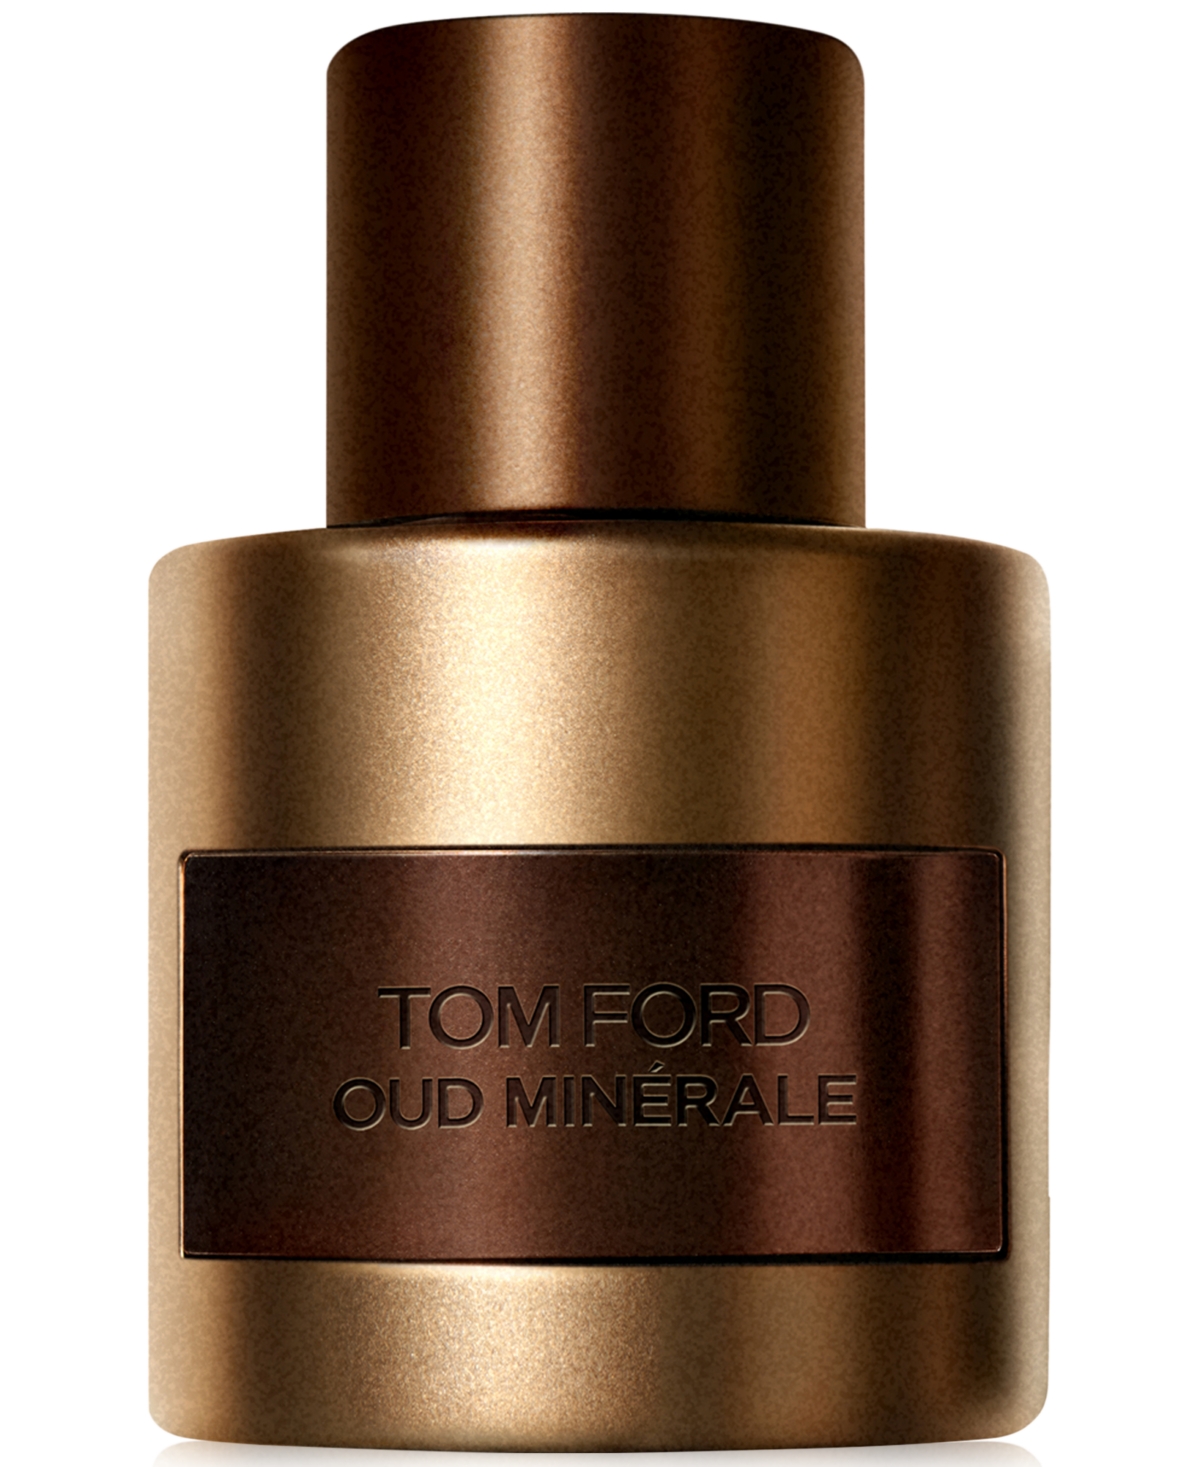 Tom Ford Oud Minerale Spray, 1.7 Oz. In No Color